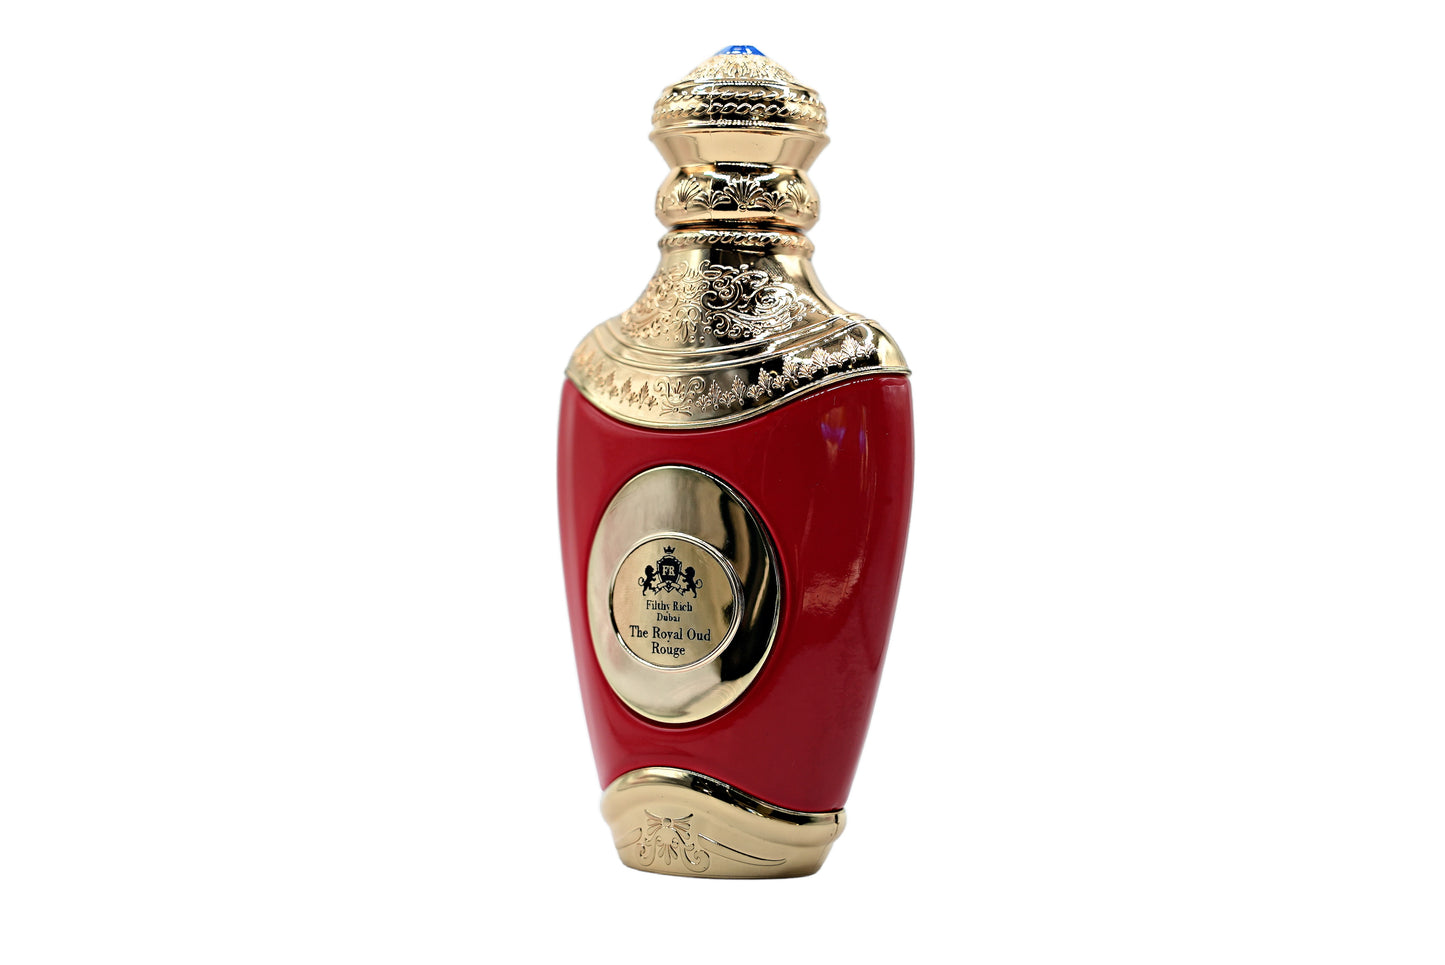 Filthy Rich The Royal Oud Rouge EDP